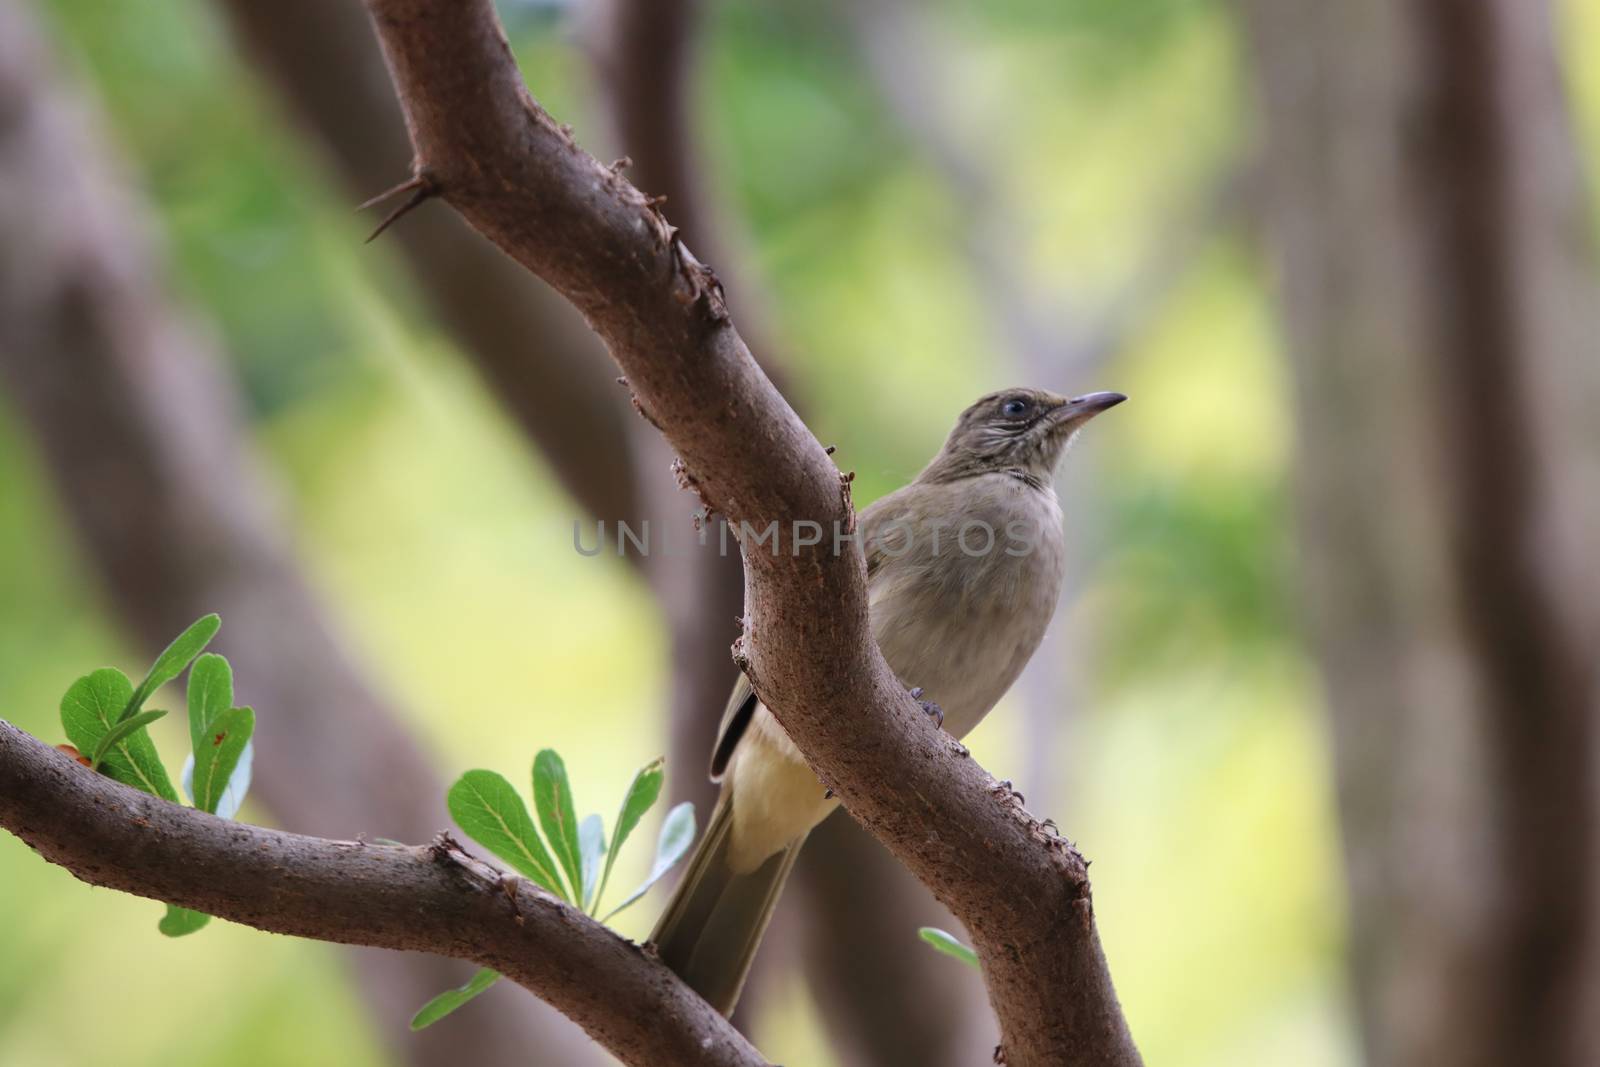 Bulbul bird holding on tree relaxing and beautiful in nature background